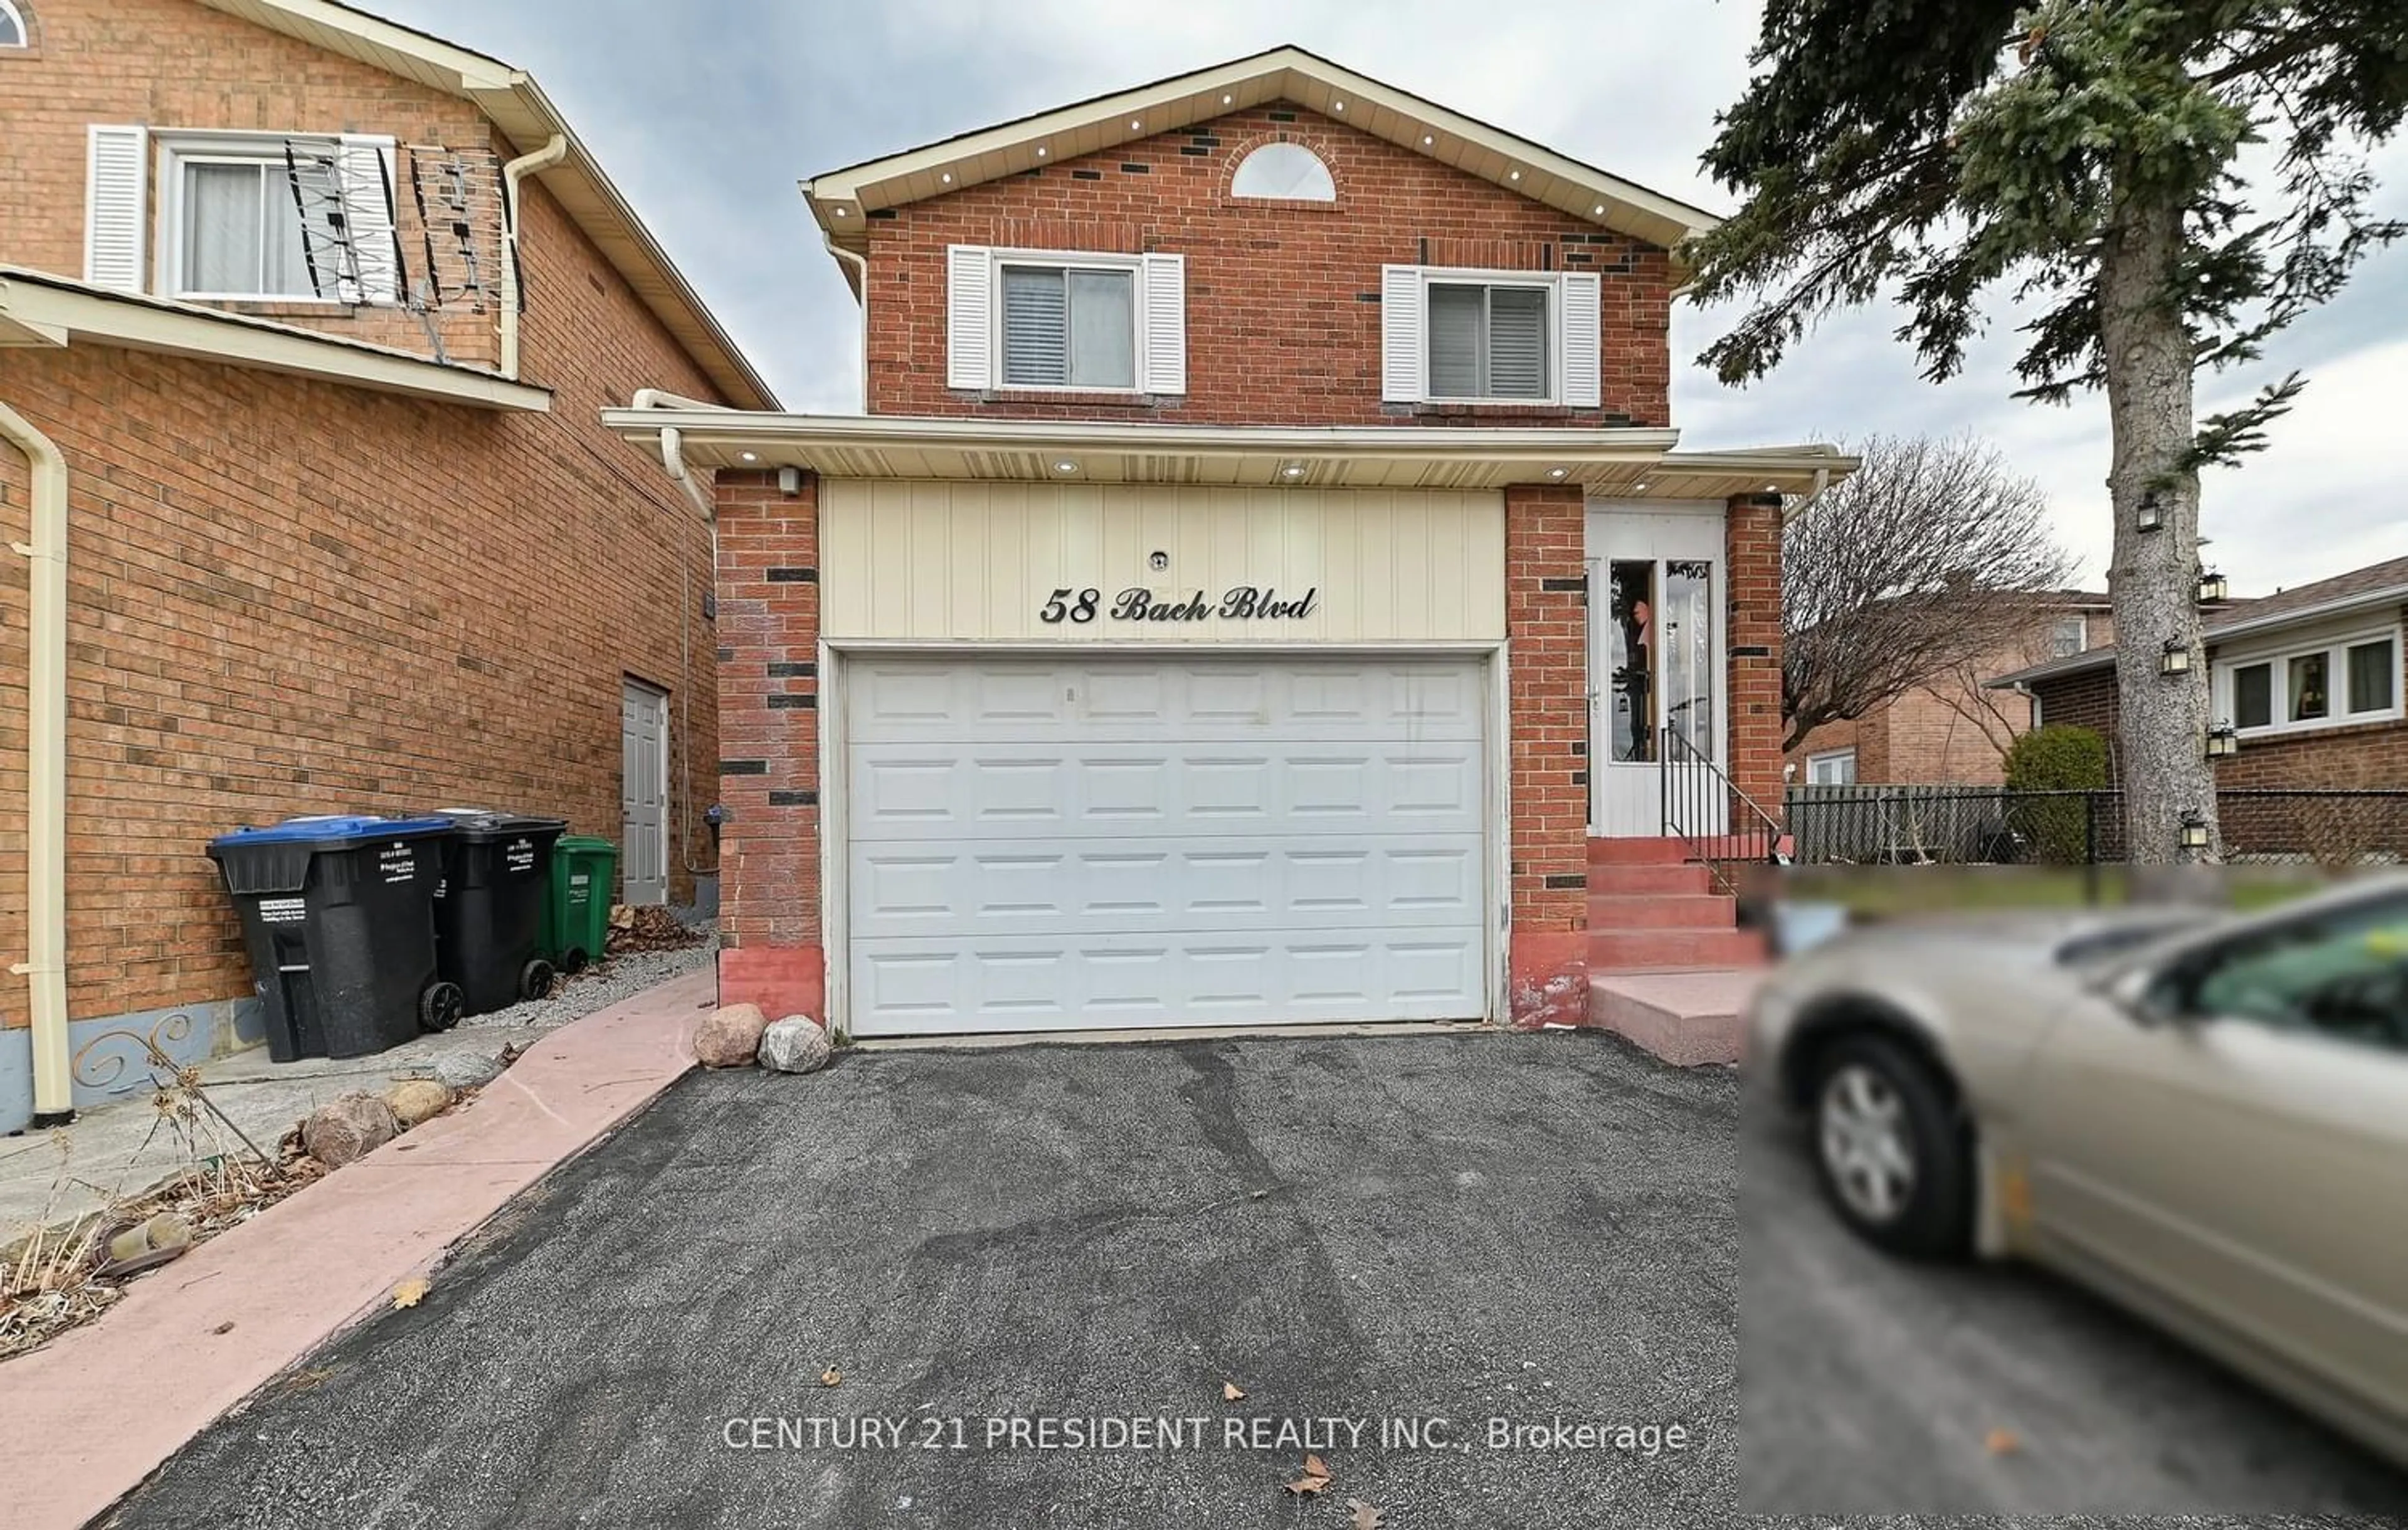 Home with brick exterior material for 58 Bach Blvd, Brampton Ontario L6Y 2X5